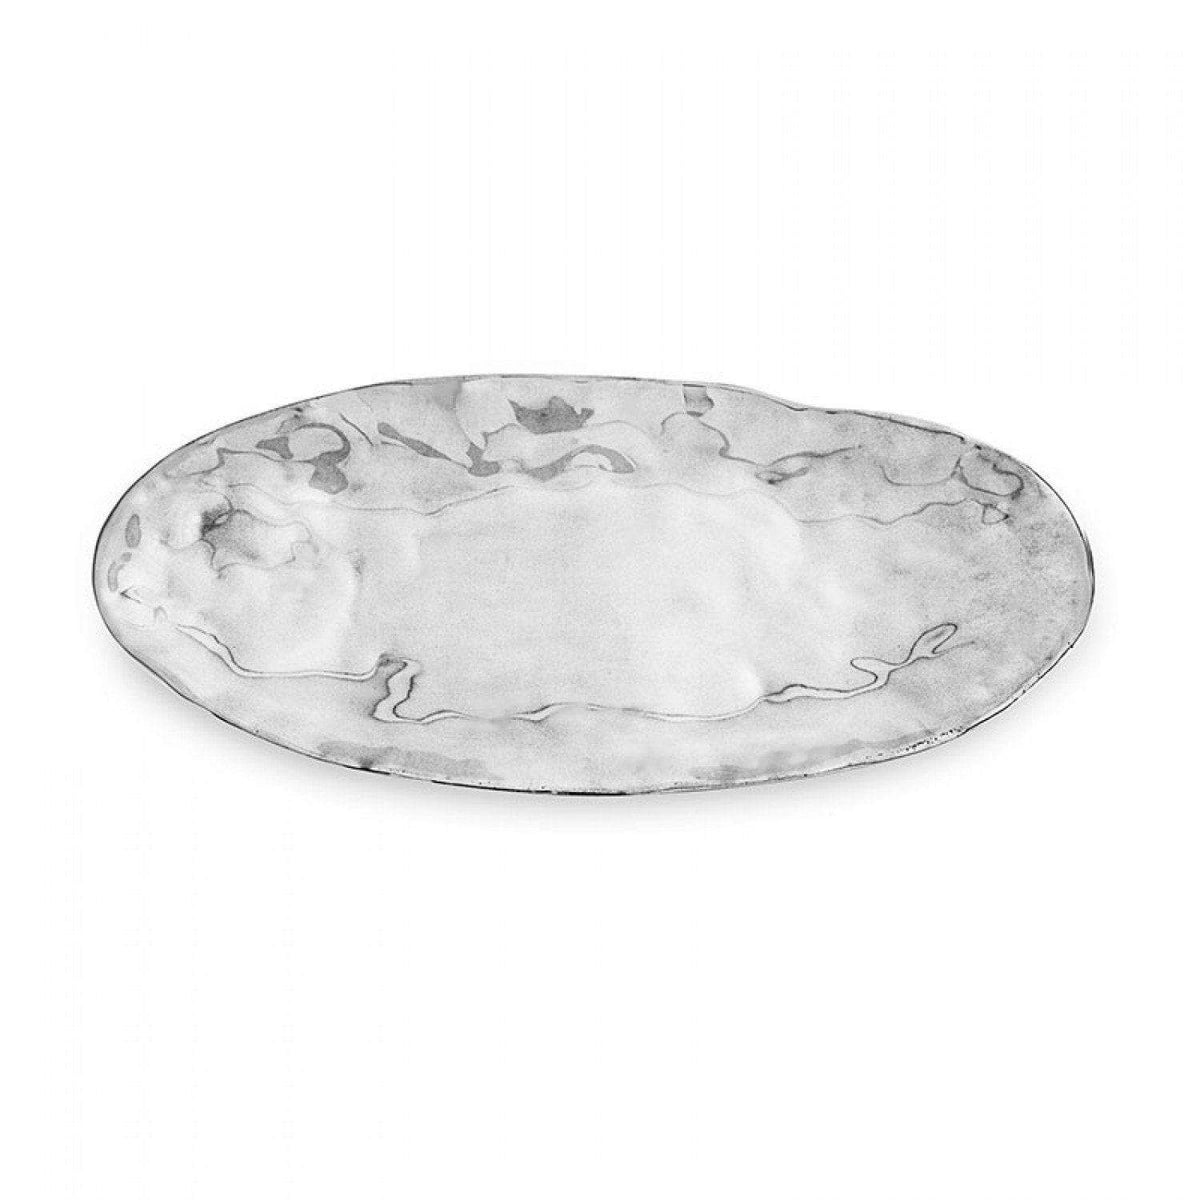 Beatriz Ball Oval Platter Med 5923 - Best Price with Fast Shipping ...